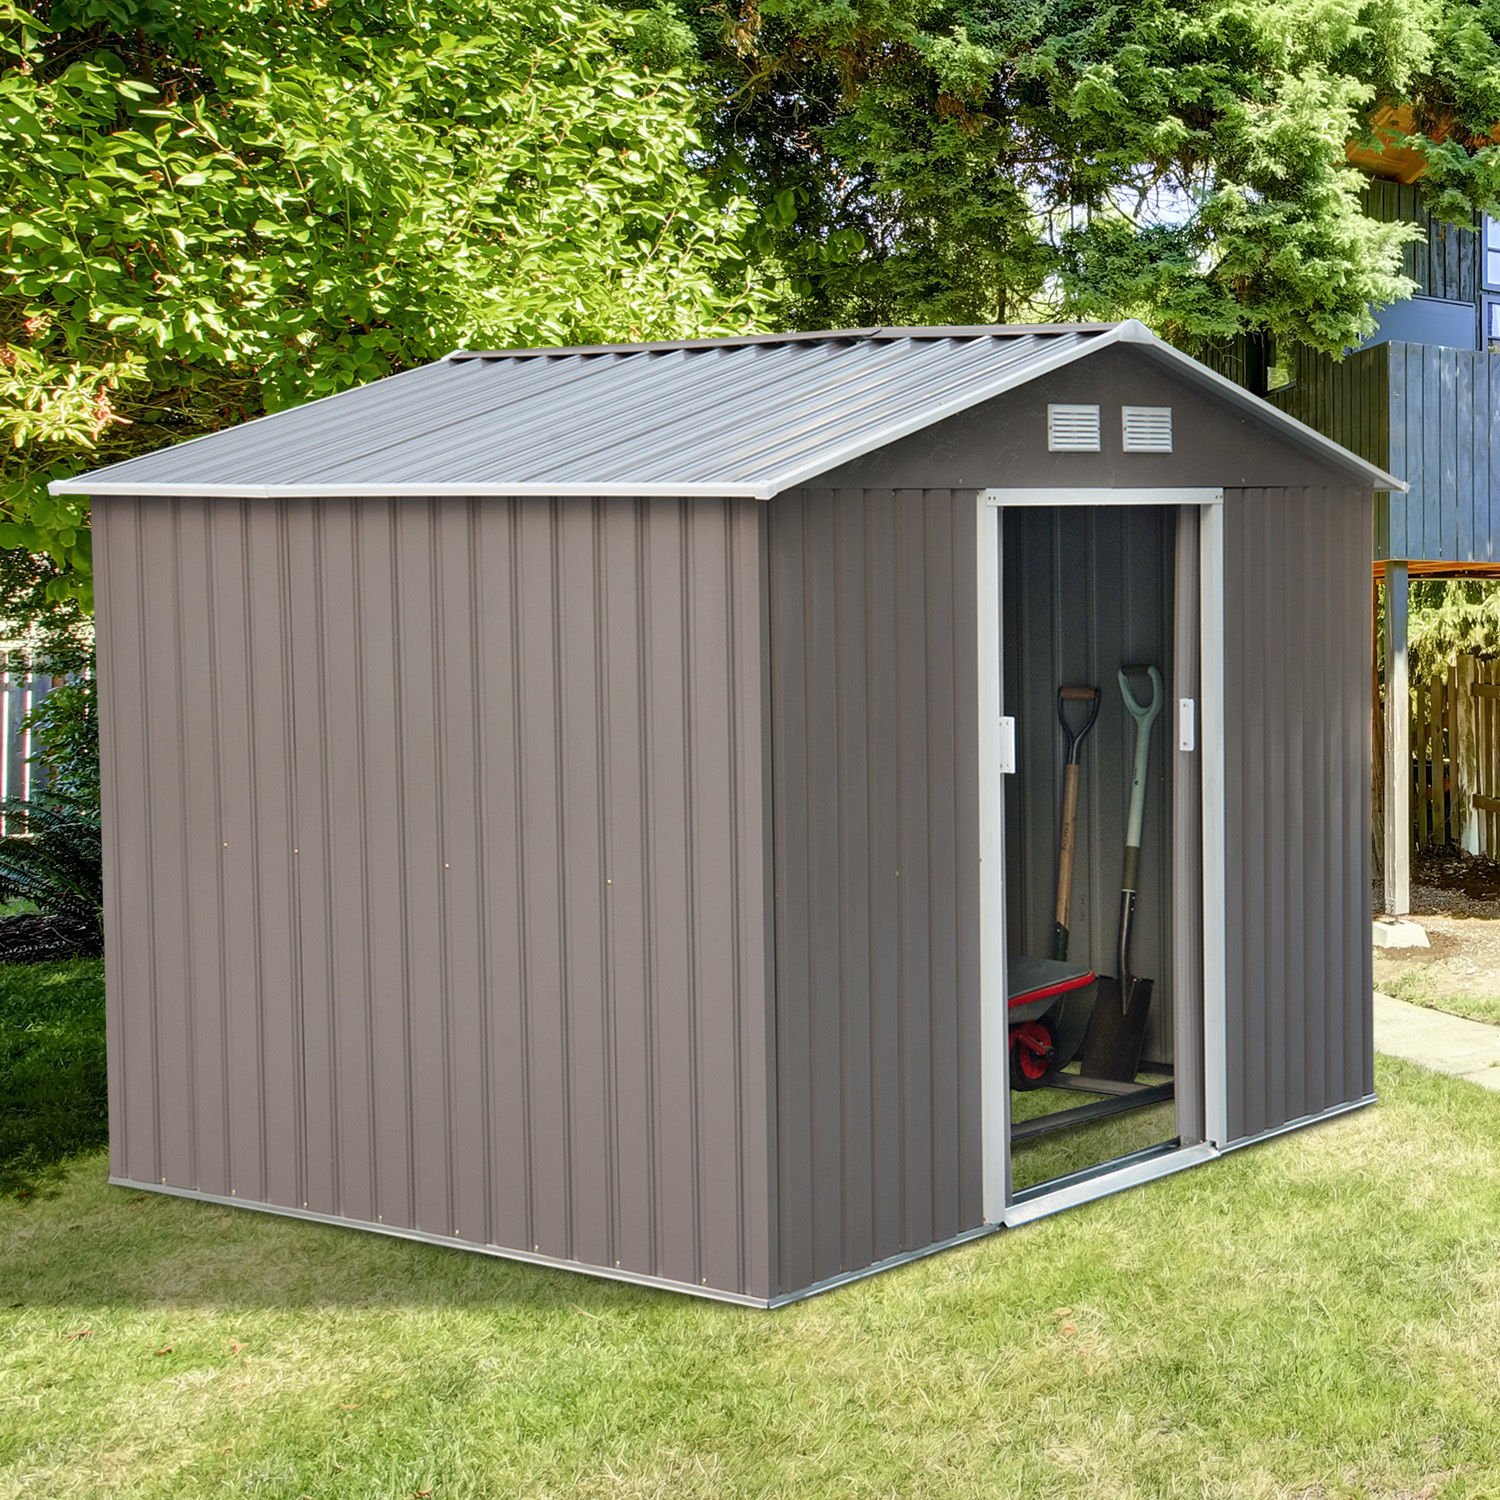 Outsunny 9' x 6' Metal Outdoor Utility Storage Tool Shed, 6.3 ft x 9.1 ft, Grey - image 3 of 11